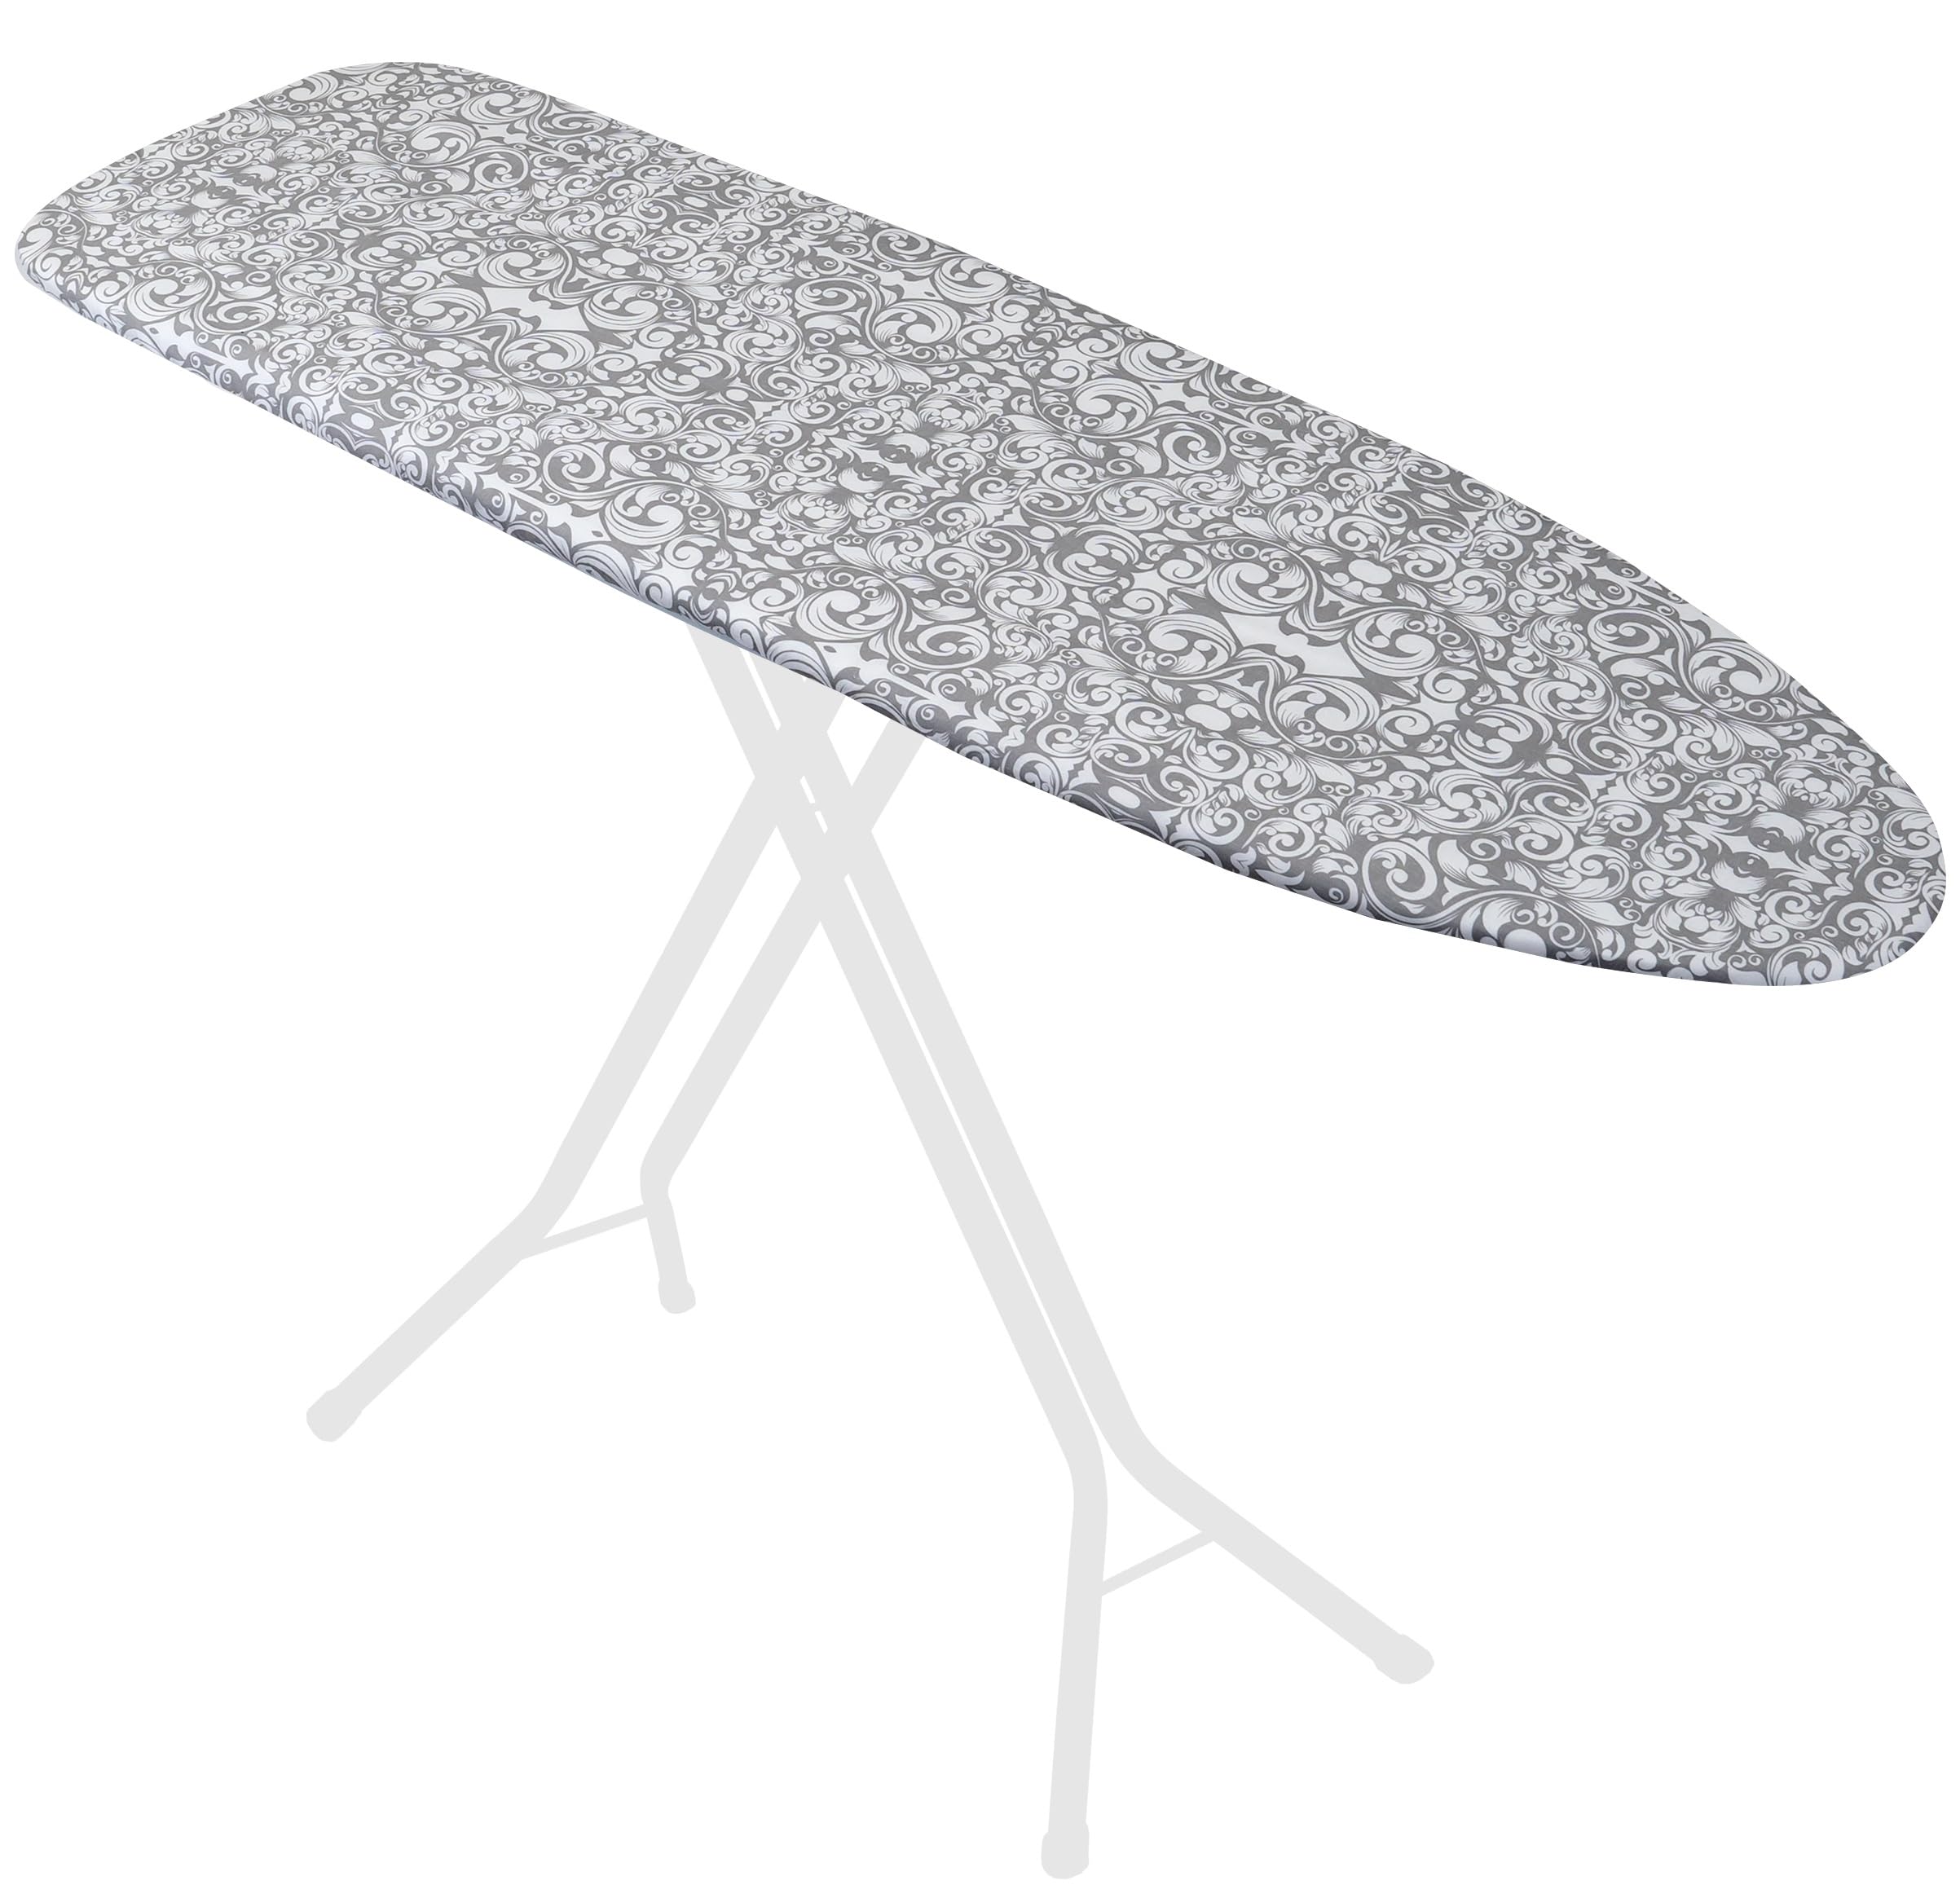 Laundry Solutions by Westex Damask Deluxe Triple Layer Extra-Thick Ironing Board Cover & Pad, 15